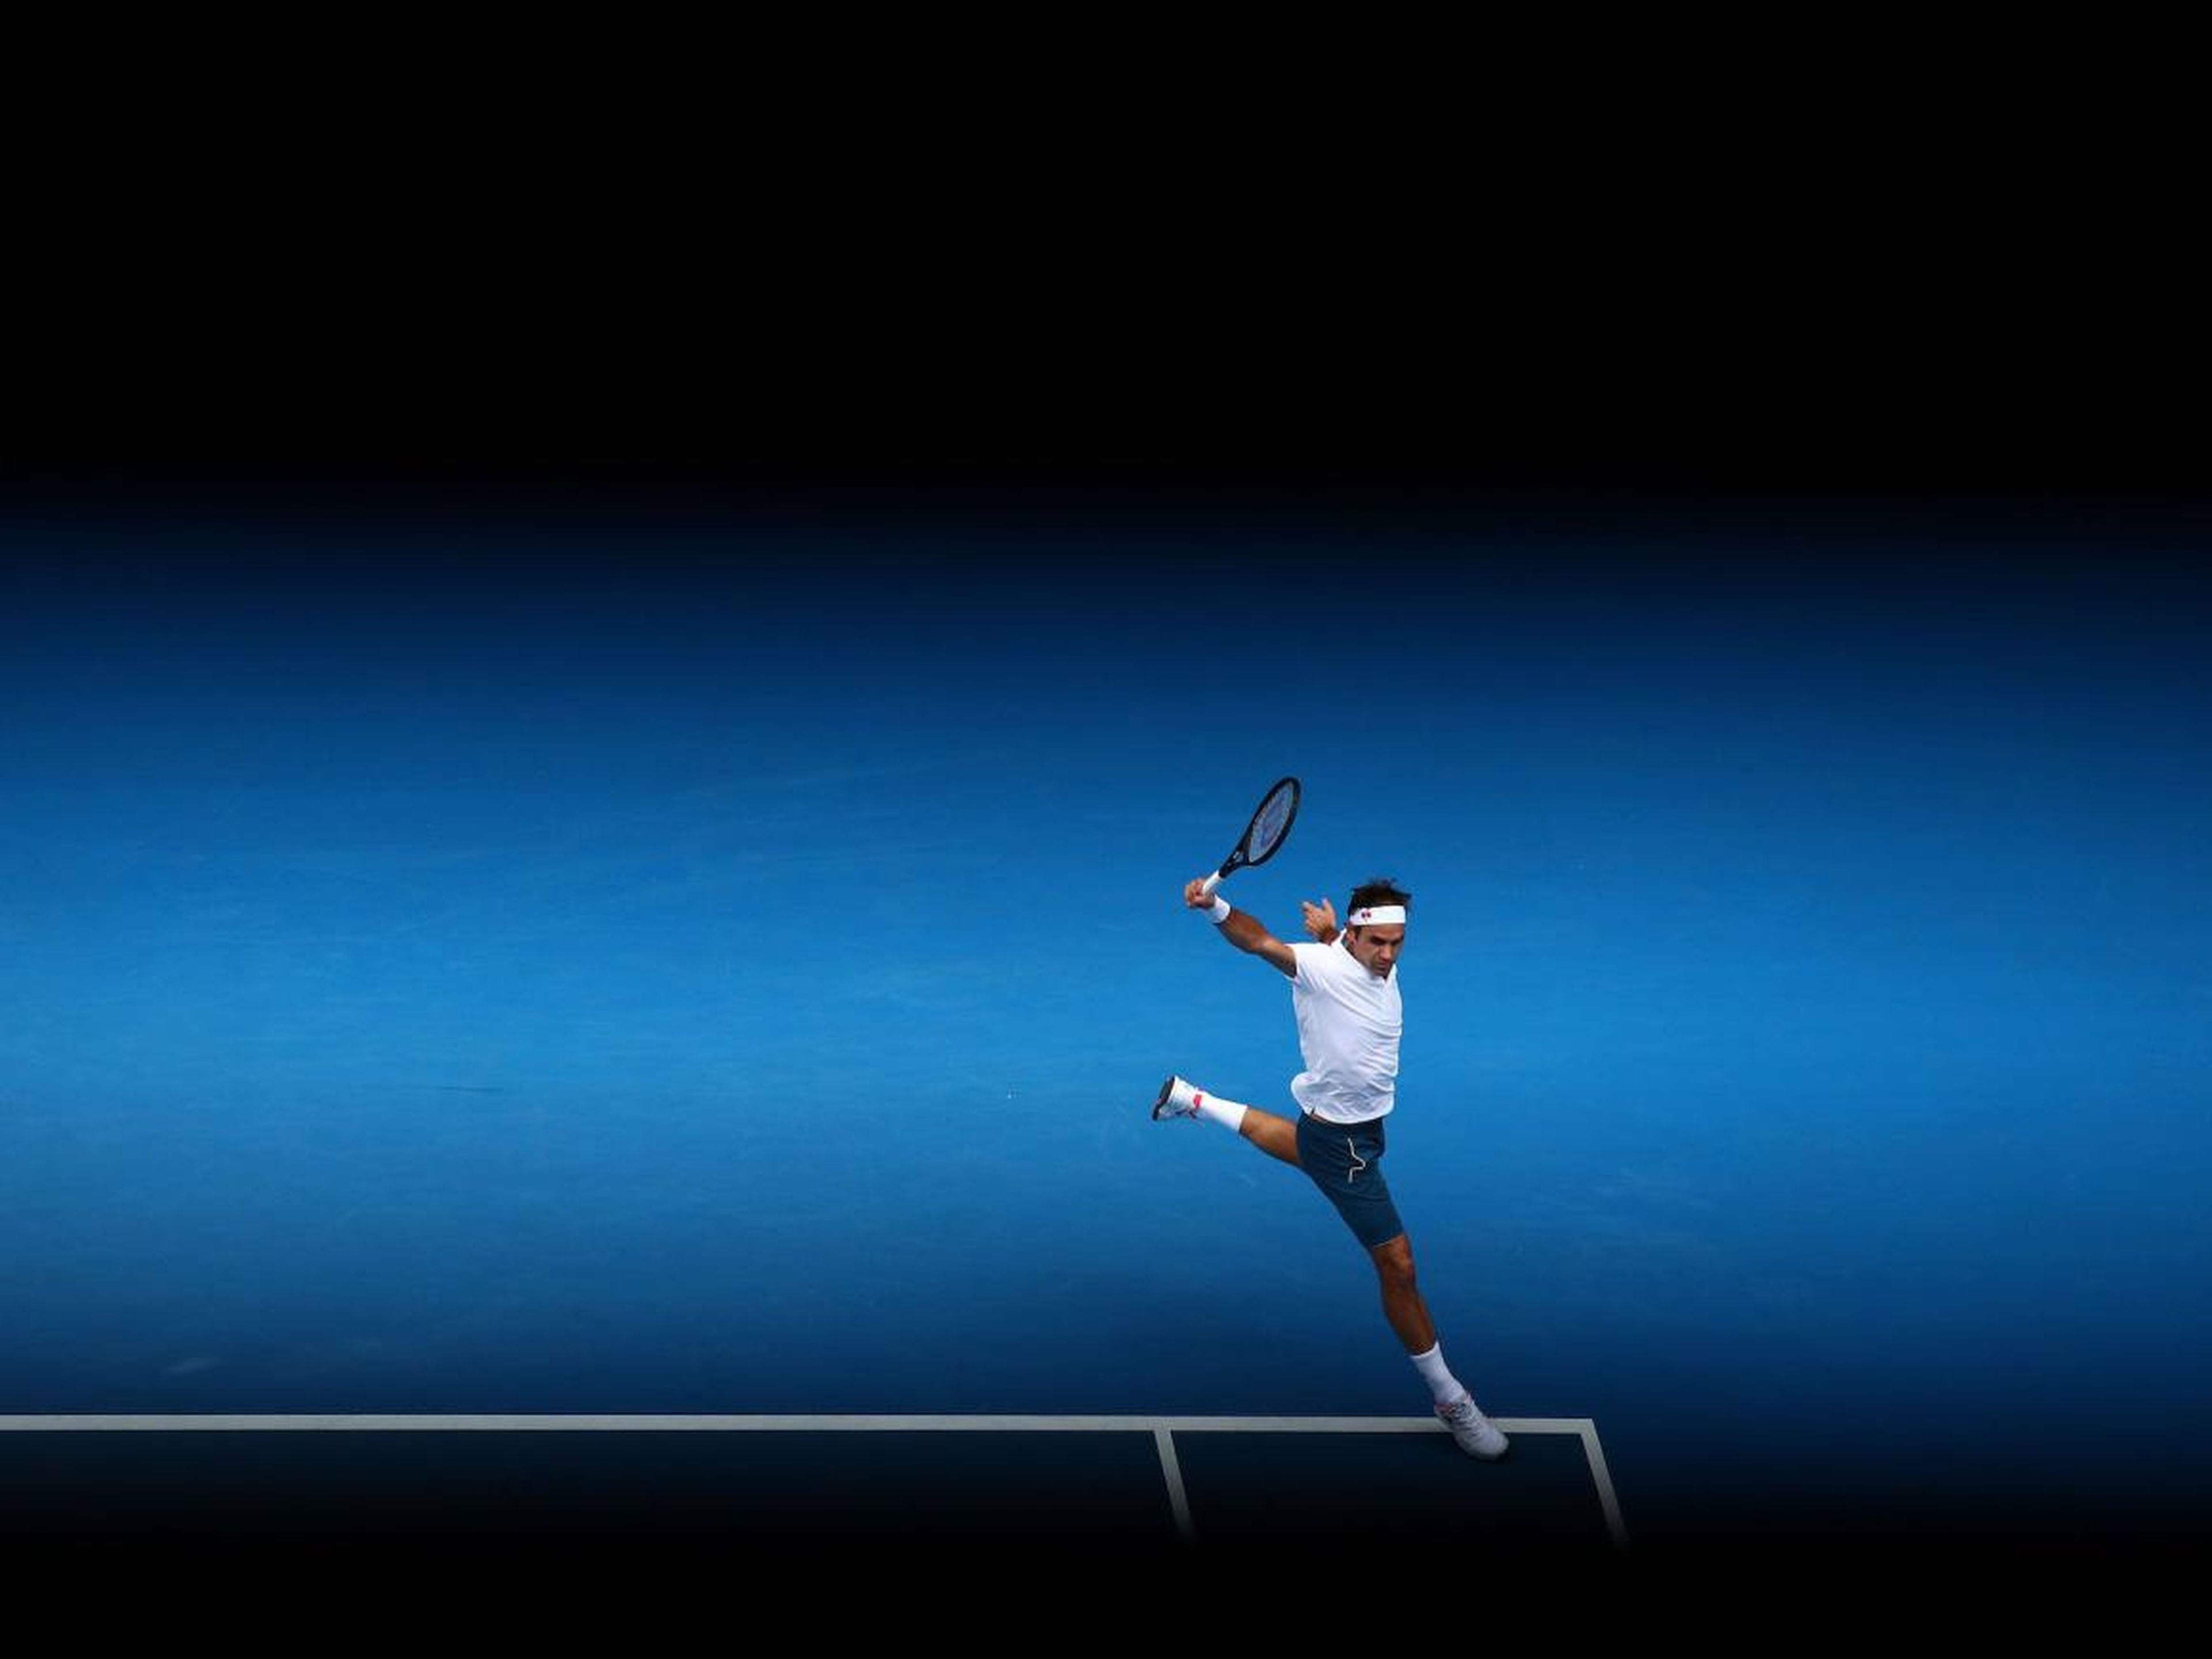 Federer's back-hand somehow looks smoother on the blue court at the Australian Open.